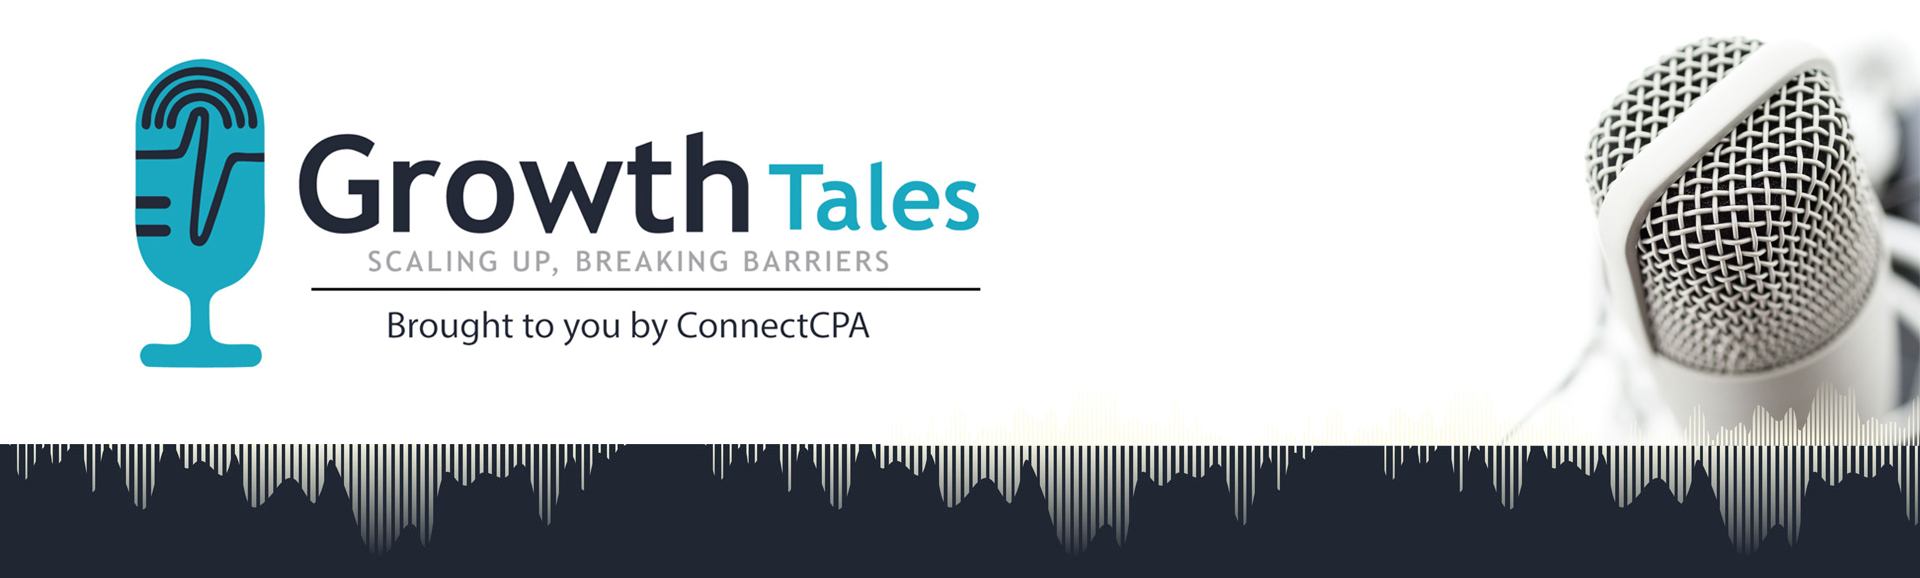 podcast.connectcpa